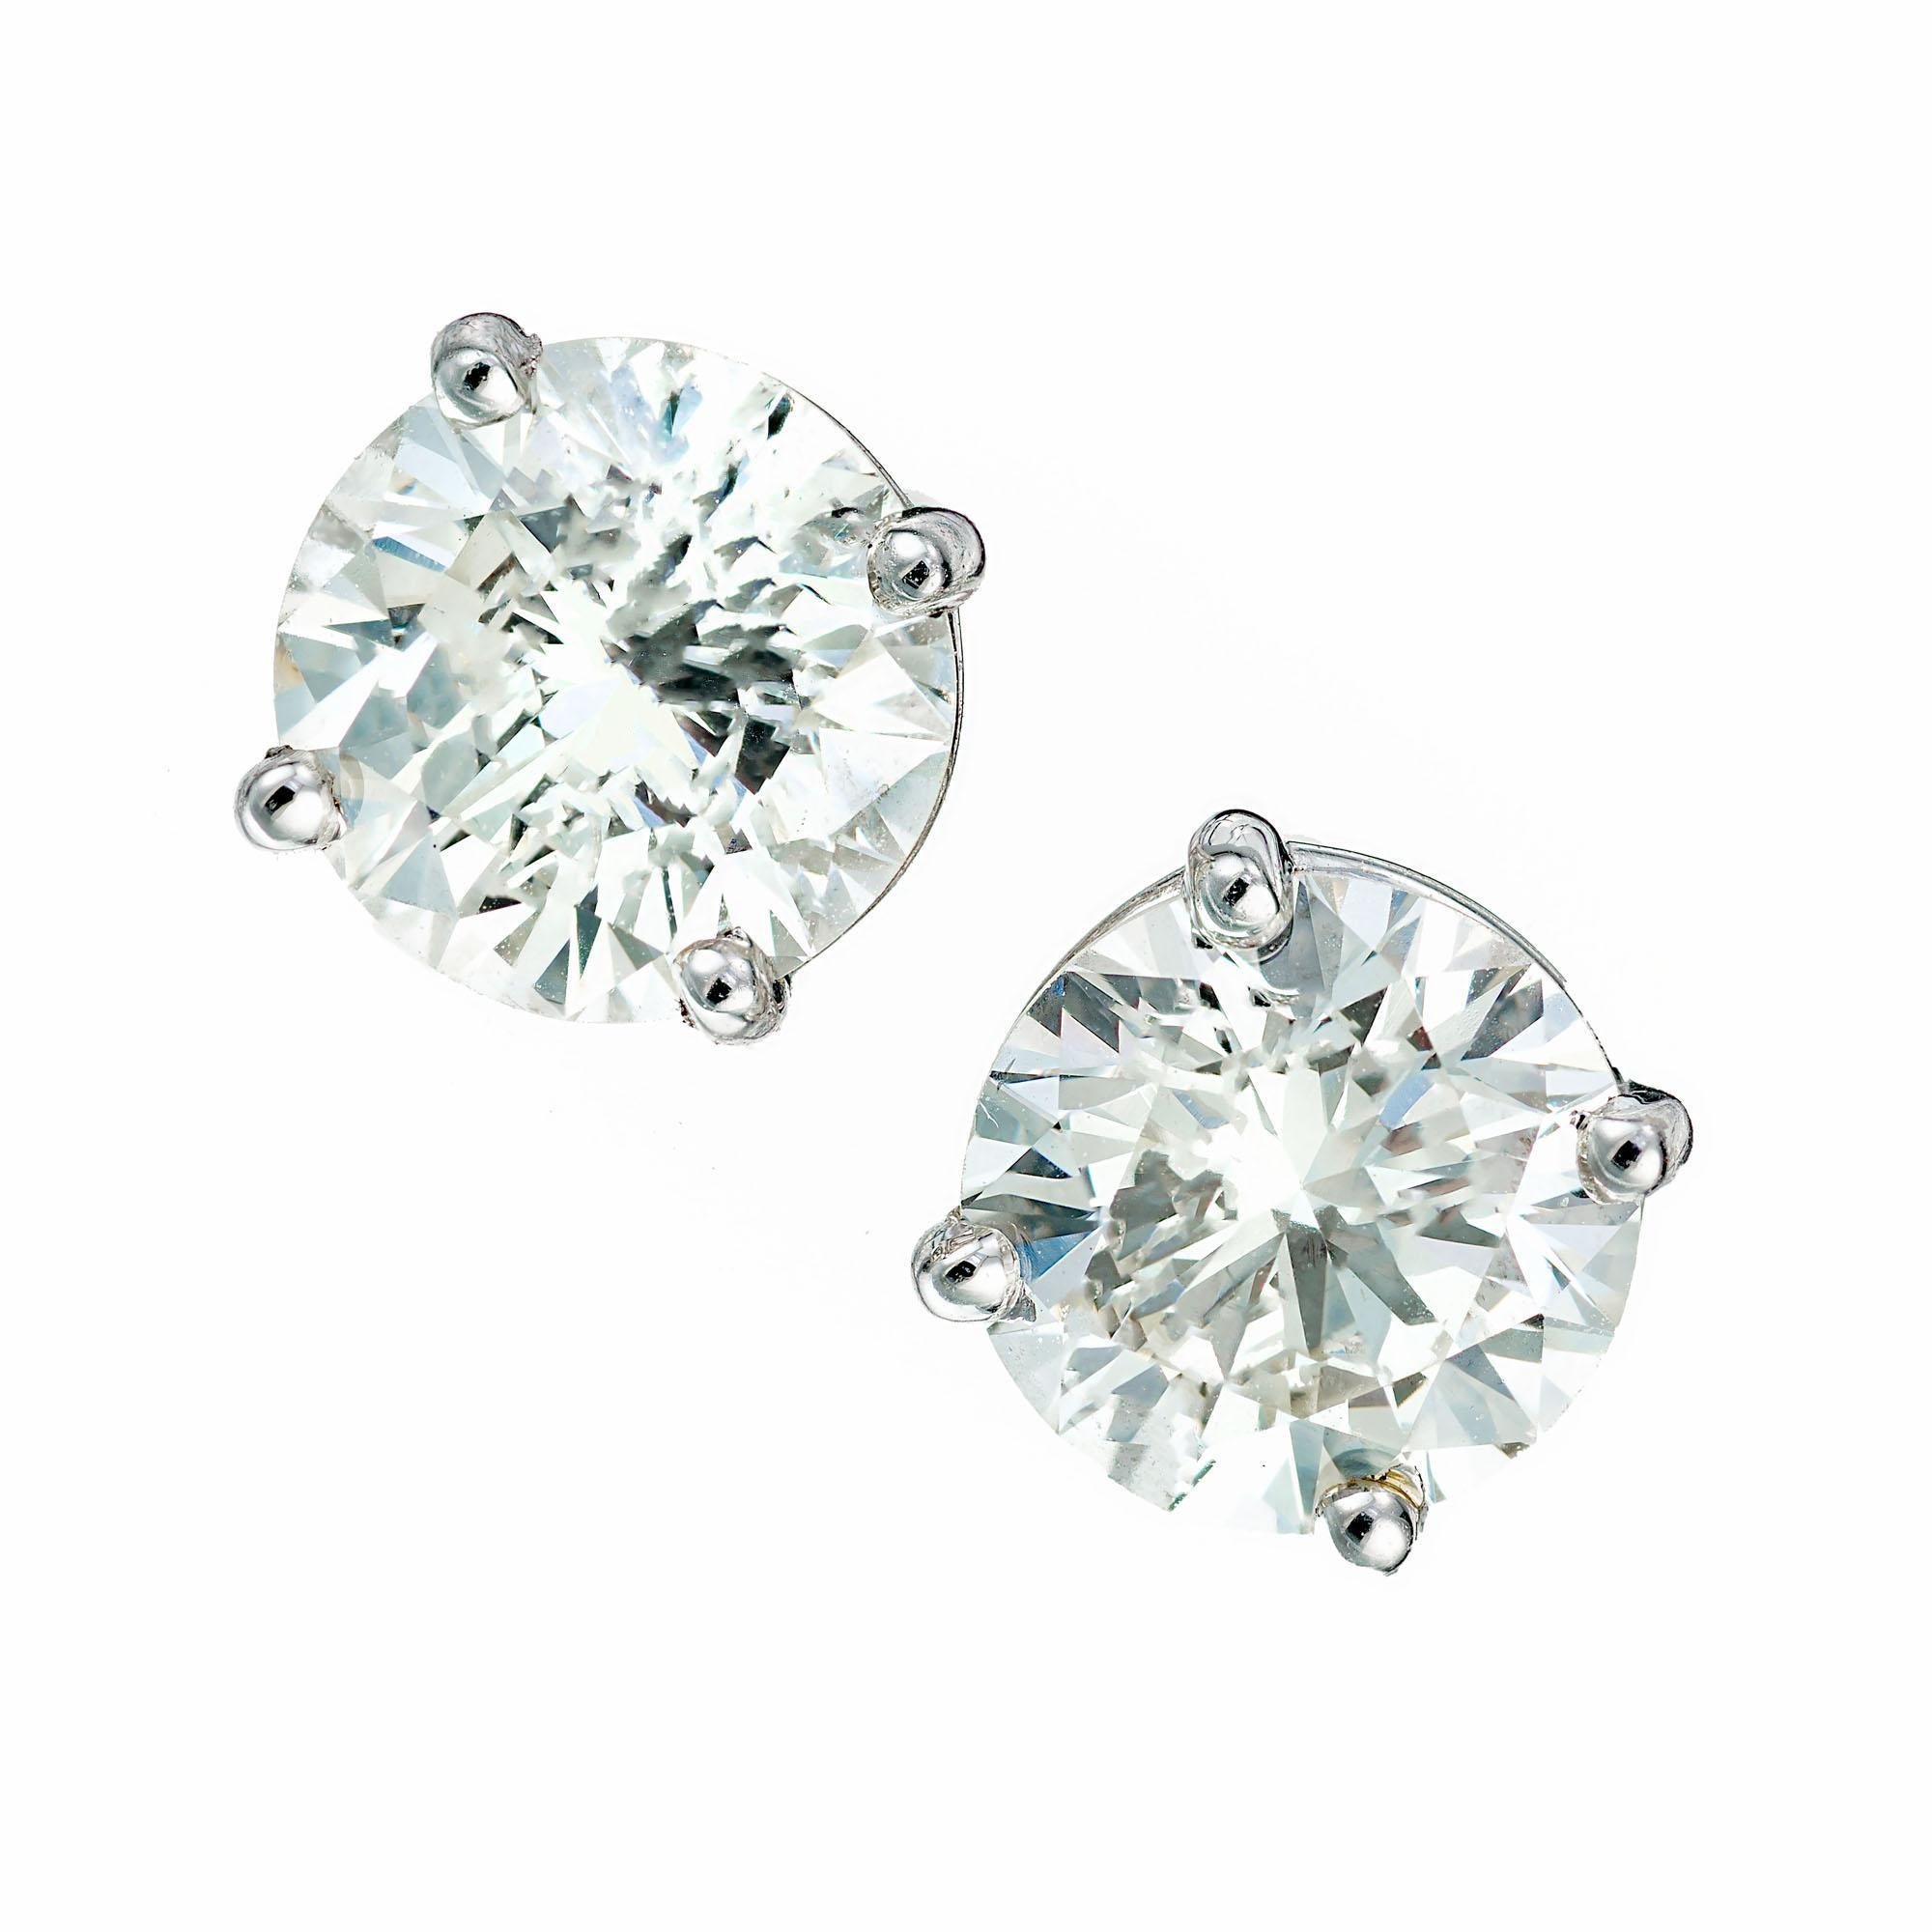 Round brilliant cut stud earrings. 2 EGL certified diamonds in simple platinum baskets. Designed and crafted in the Peter Suchy workshop.

1 round brilliant cut diamond, J-K VS2 approx..89cts EGL Certificate # 400148927D
1 round brilliant cut